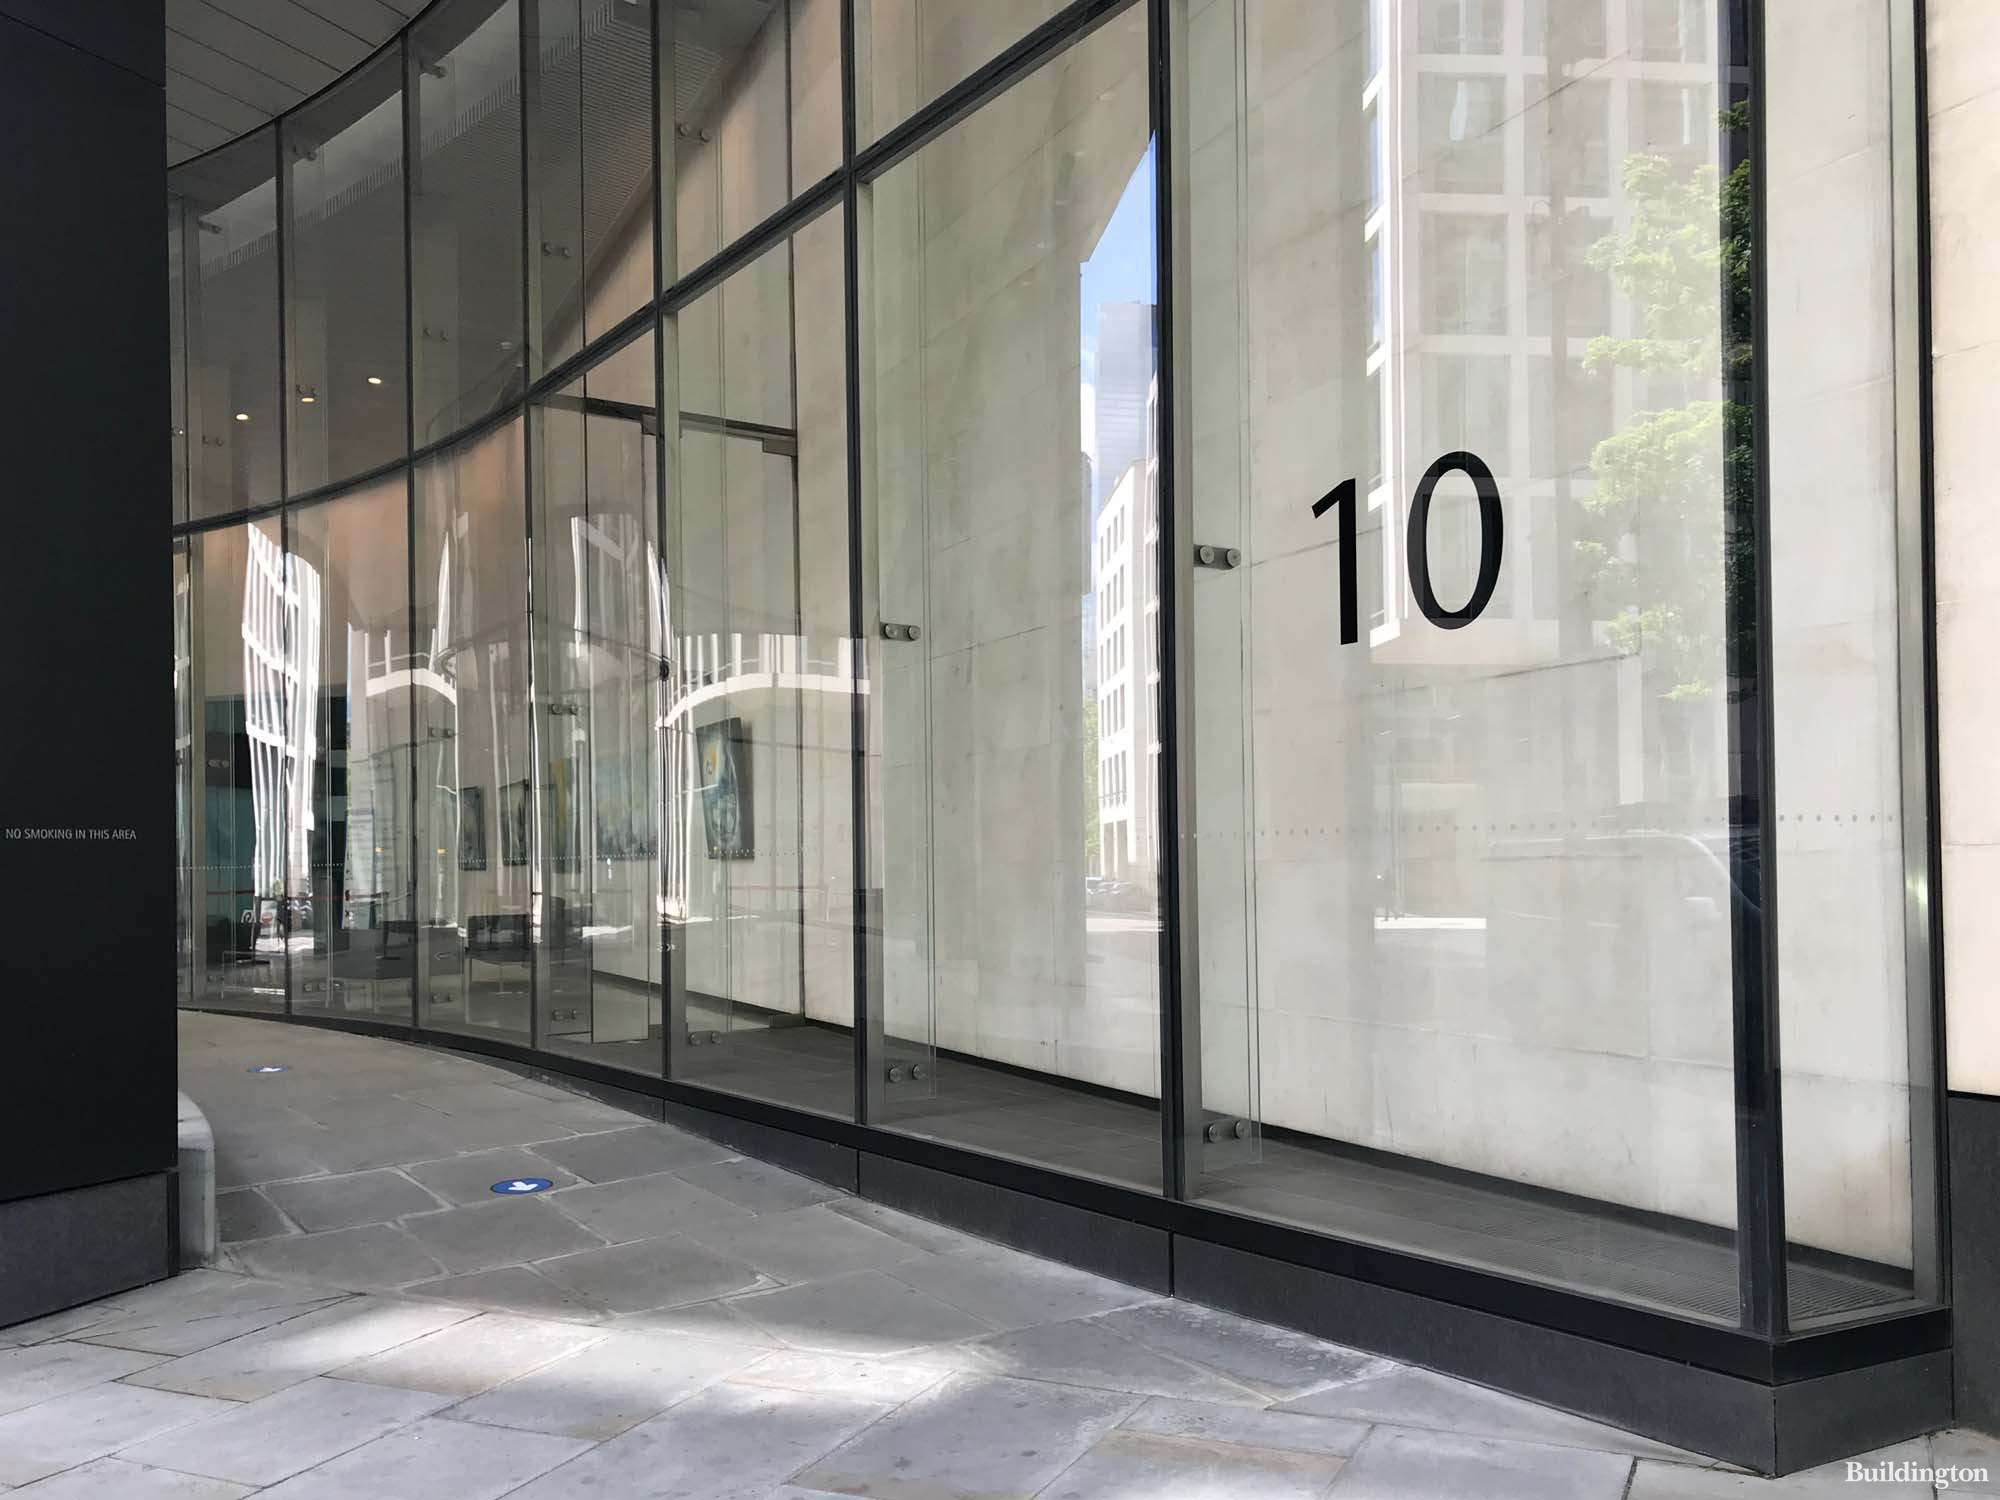 In front of 10 Gresham Street office building in the City of London designed by Foster + Partners.